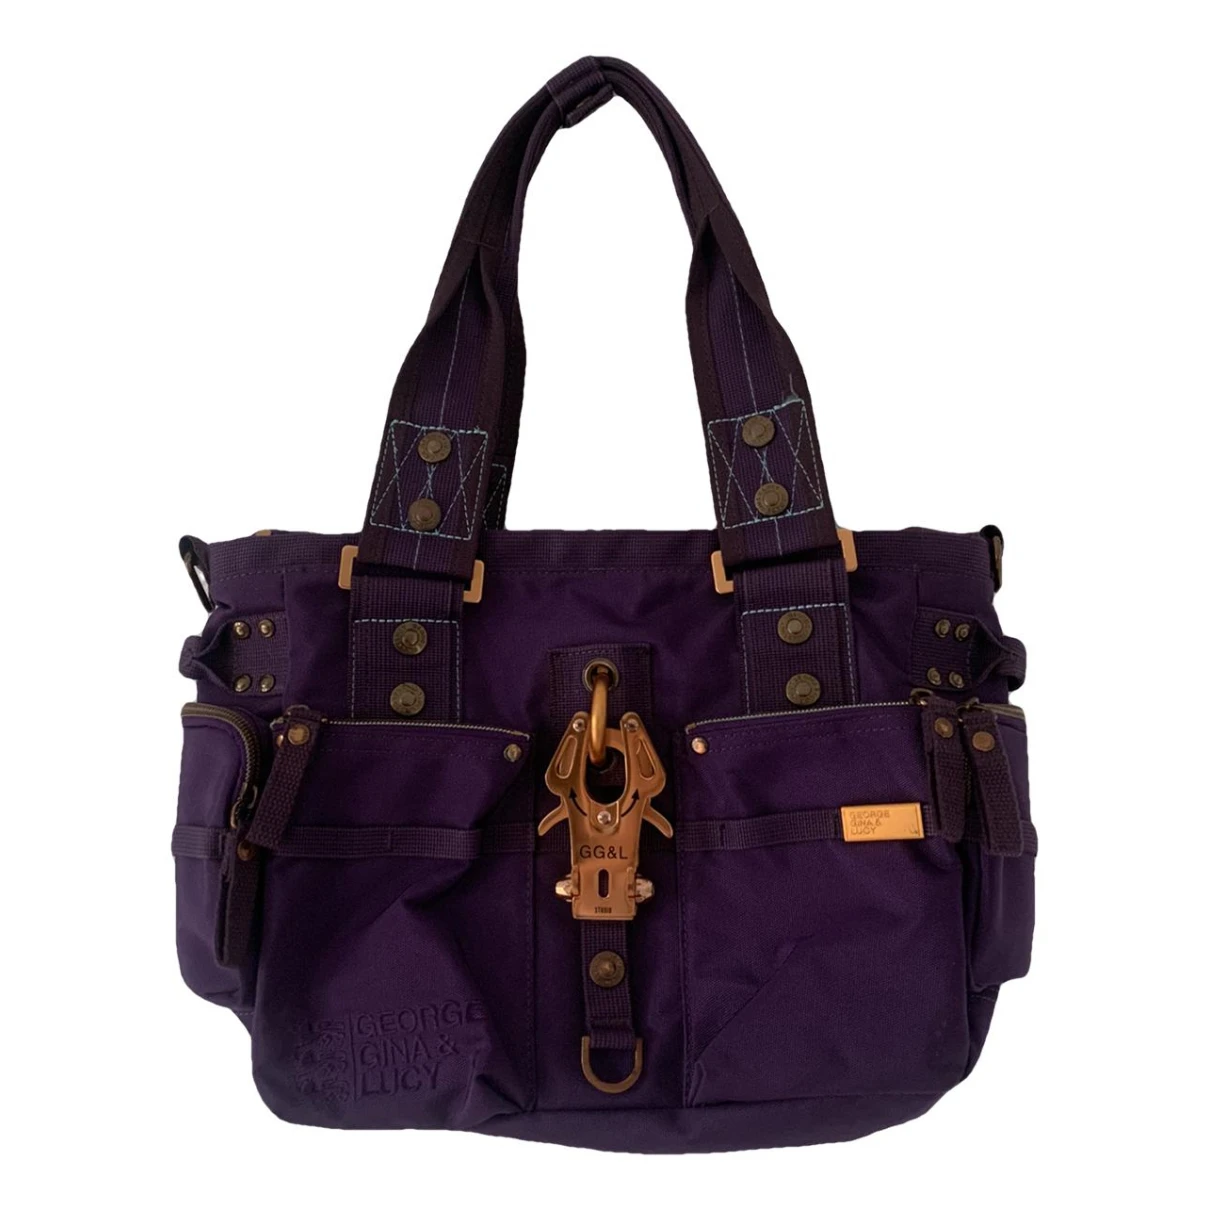 Pre-owned George Gina & Lucy Handbag In Purple